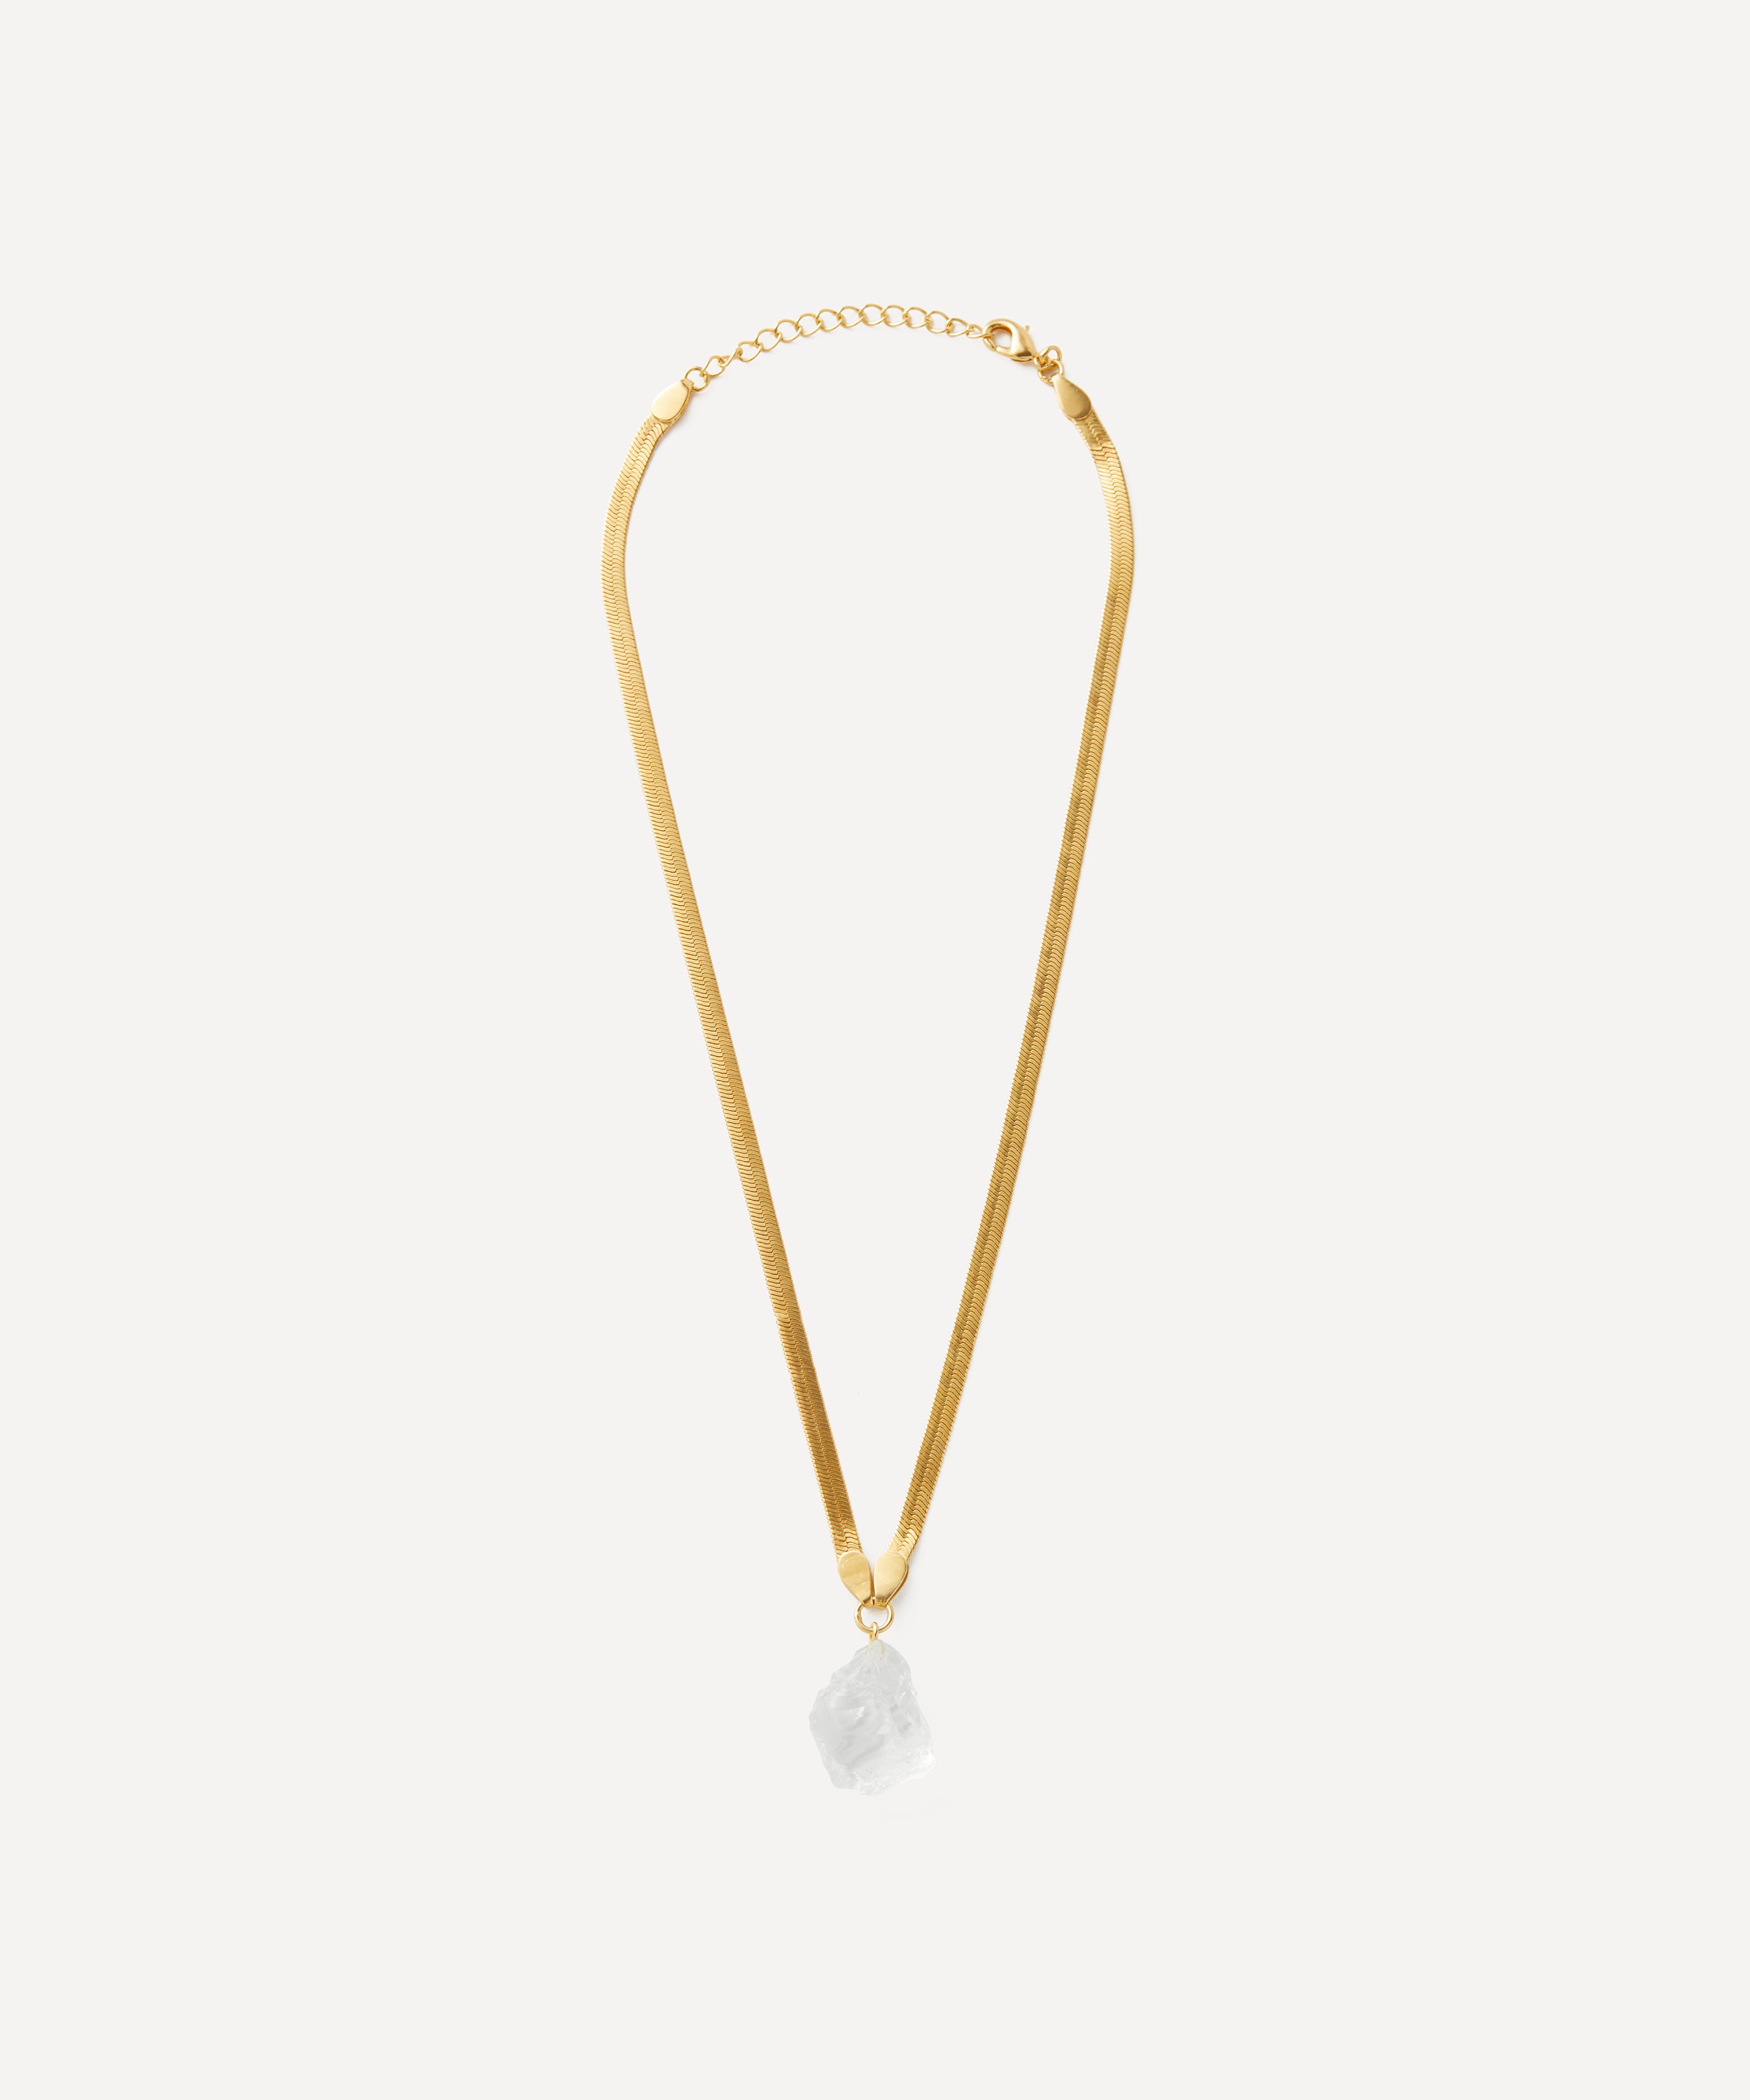 Shyla - 22ct Gold-Plated Serpentine Raw Crystal Pendant Necklace image number 1